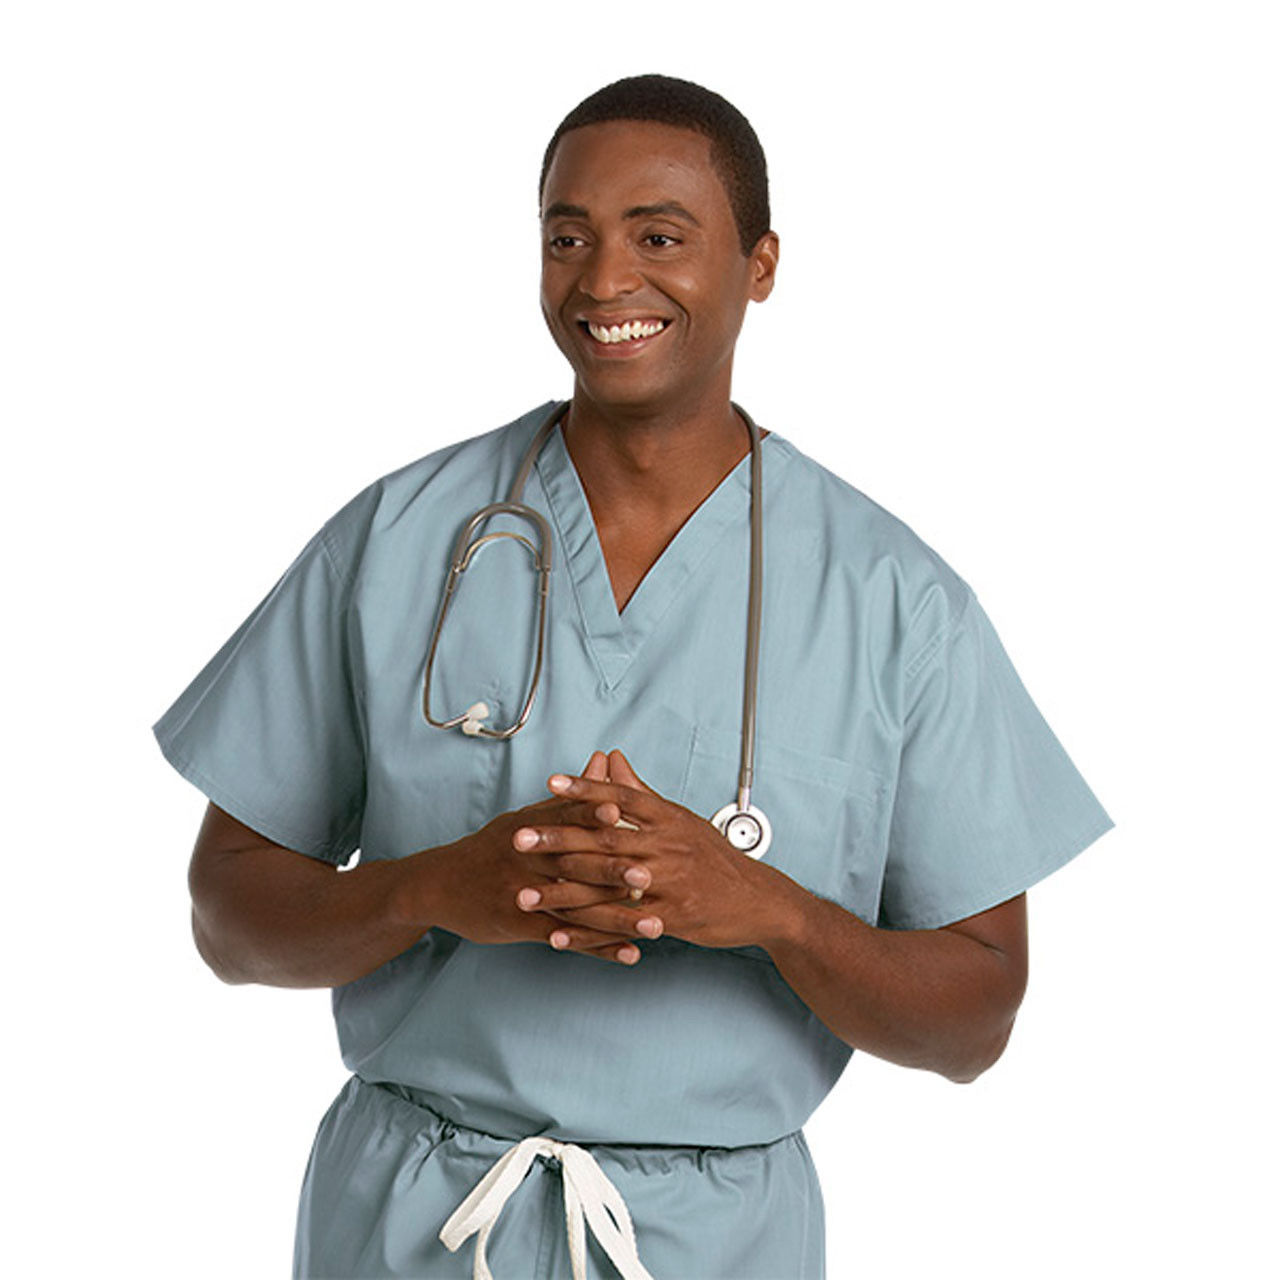 What features do these surgical scrubs have, including the pocket and Misty Green color?